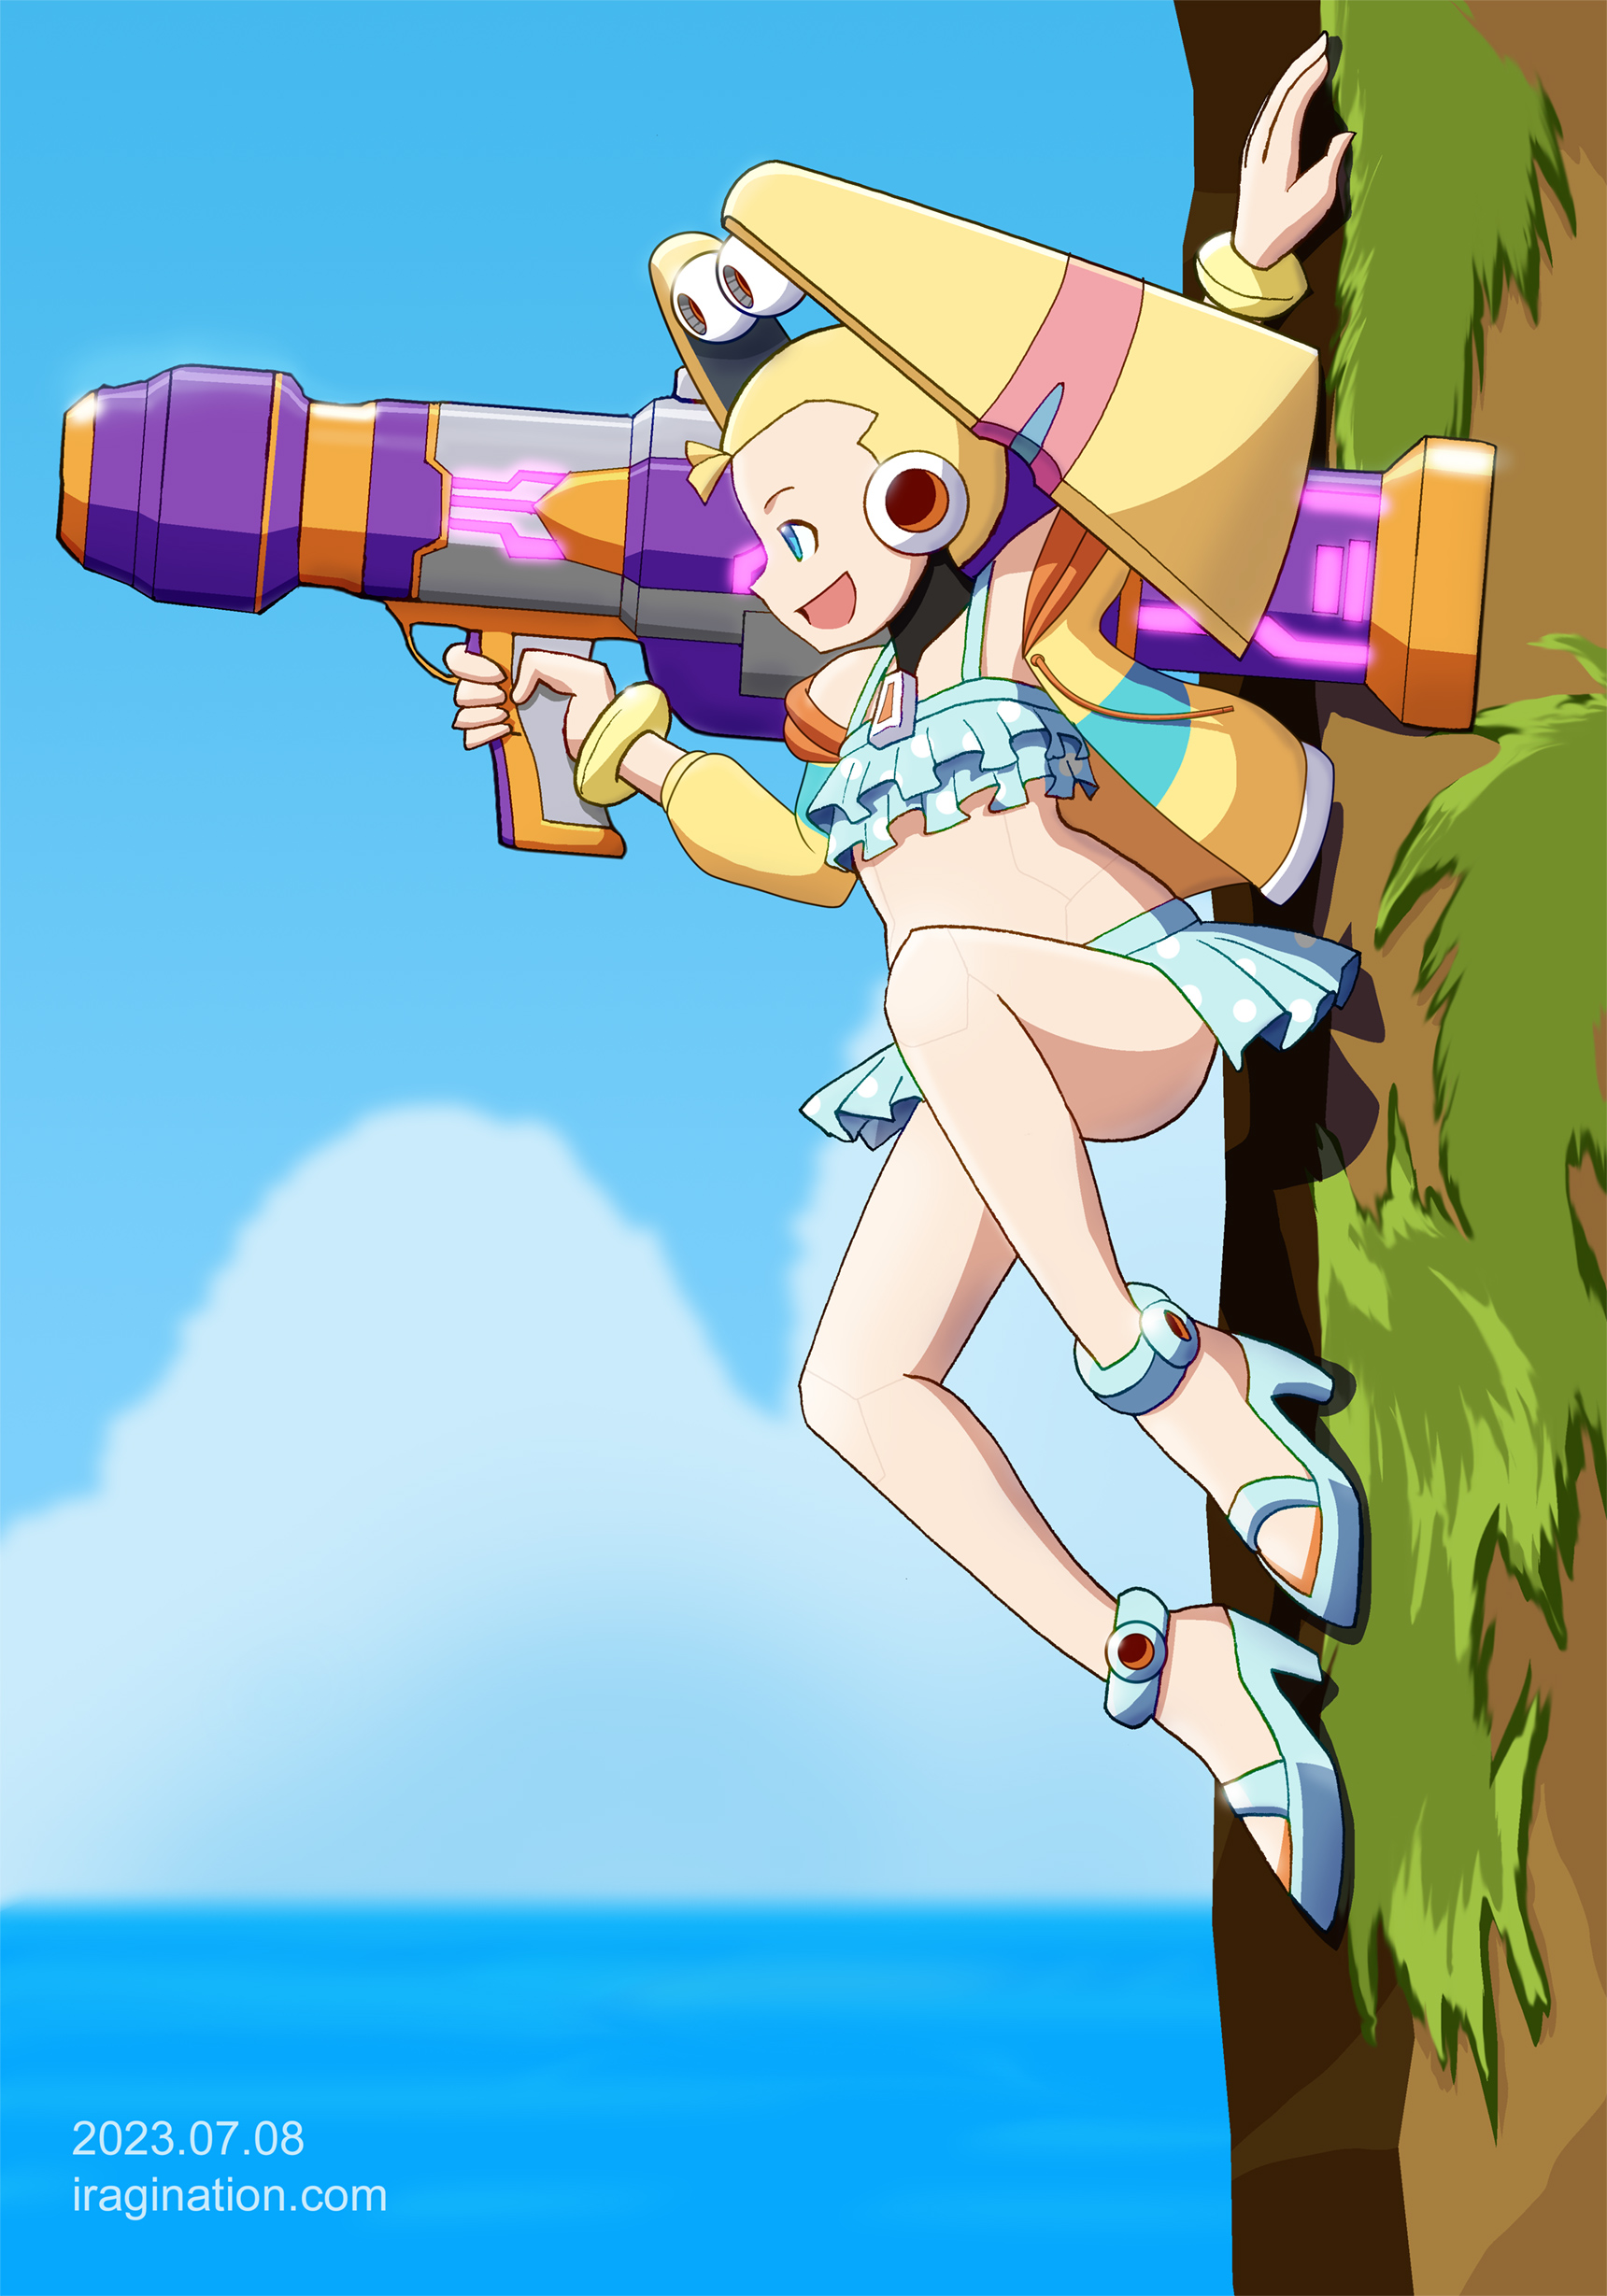 Swimsuit Pallette – Clearing The Last Viruses
This scene is based on the second [b]Mega Man X DiVE[/b] summer event: [url=https://www.facebook.com/CAPCOM.RXD/posts/pfbid02tD3JZMTEqZG2d2mta6AZinZ3ZLDXMEKHgmu5TKESu4McHc1fJromjM1fS4SVkJuEl]Summer Swimsuit Vacation 2021[/url]. Out of the three summer events, I find this one the most polished, with vibrant colors and a nice contrast between the underground and floating island sections. 

Maybe they repeated the 2020 one way too many times, and the 2022 one had no script or a boss battle. The latter is something that they have one last chance to fix this year but I would not hold my breath expecting that to happen.

Mega Man X DiVE © CAPCOM
Keywords: pallette